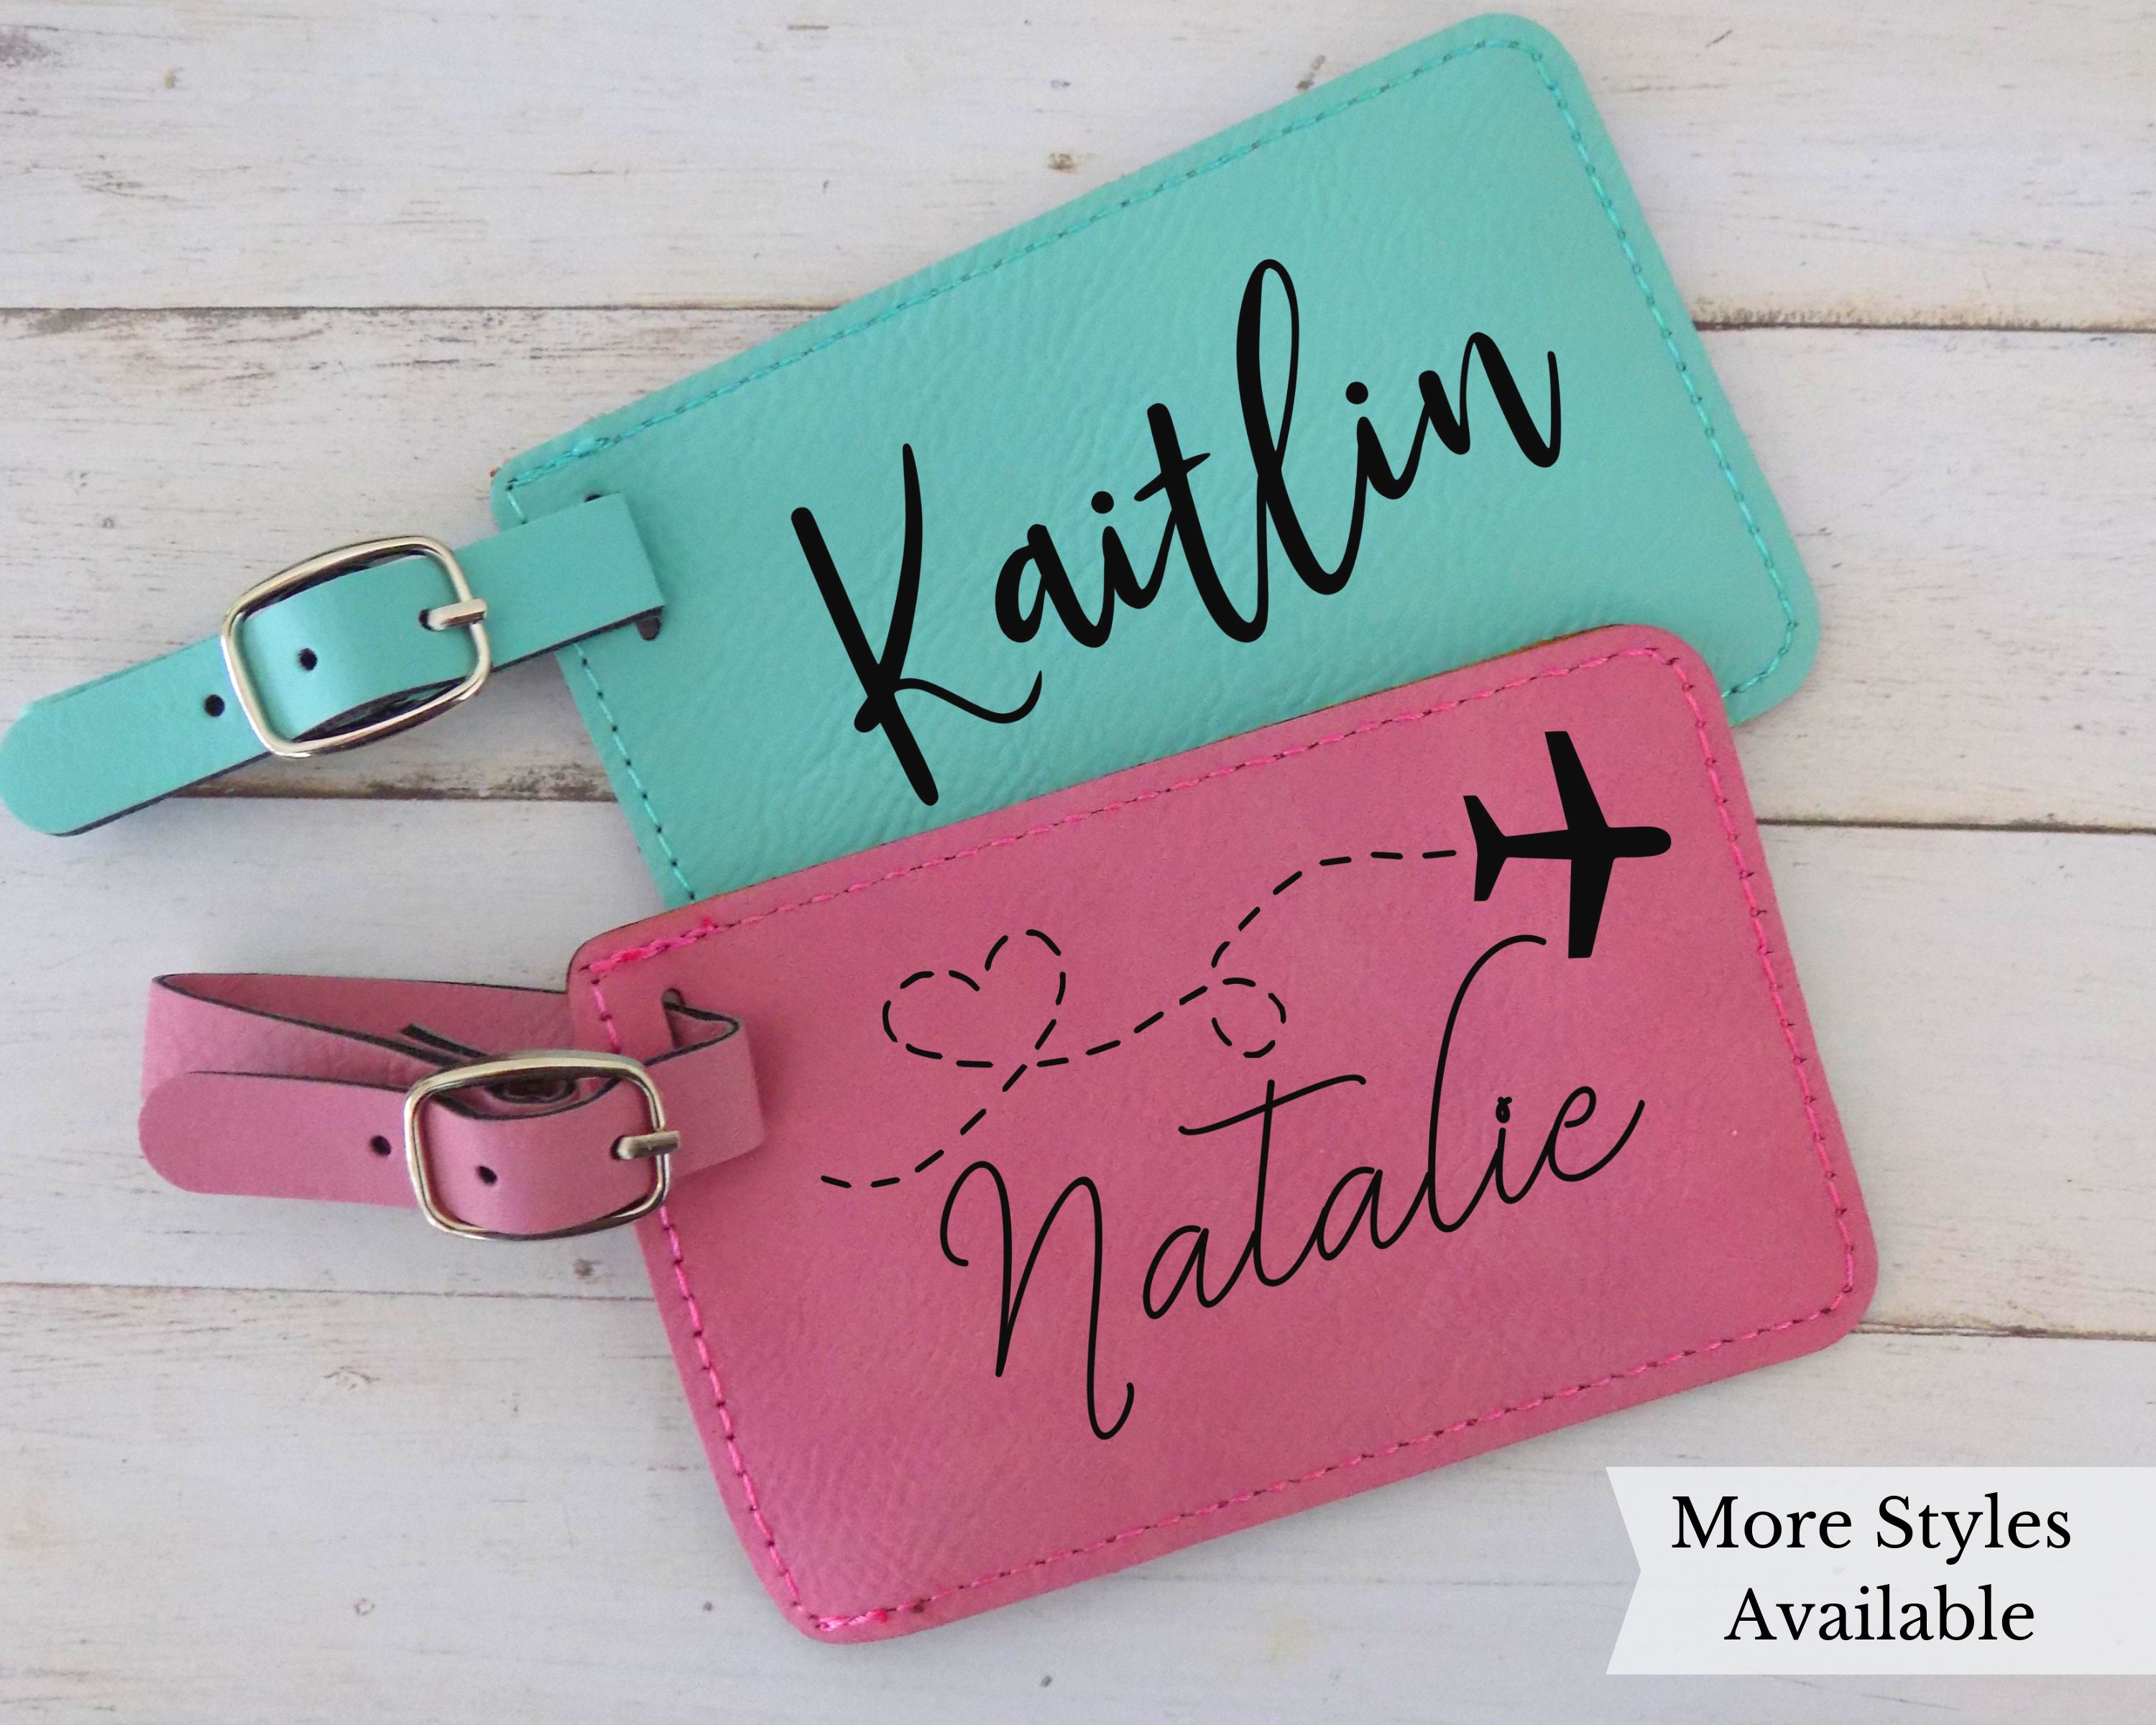 Travel Accessories Luggage Tags Luggage Tags Personalized Engraved Luggage Tag Tassen & portemonnees Bagage & Reizen Bagagelabels Custom Luggage Tag Personalized Luggage Tag Leather 